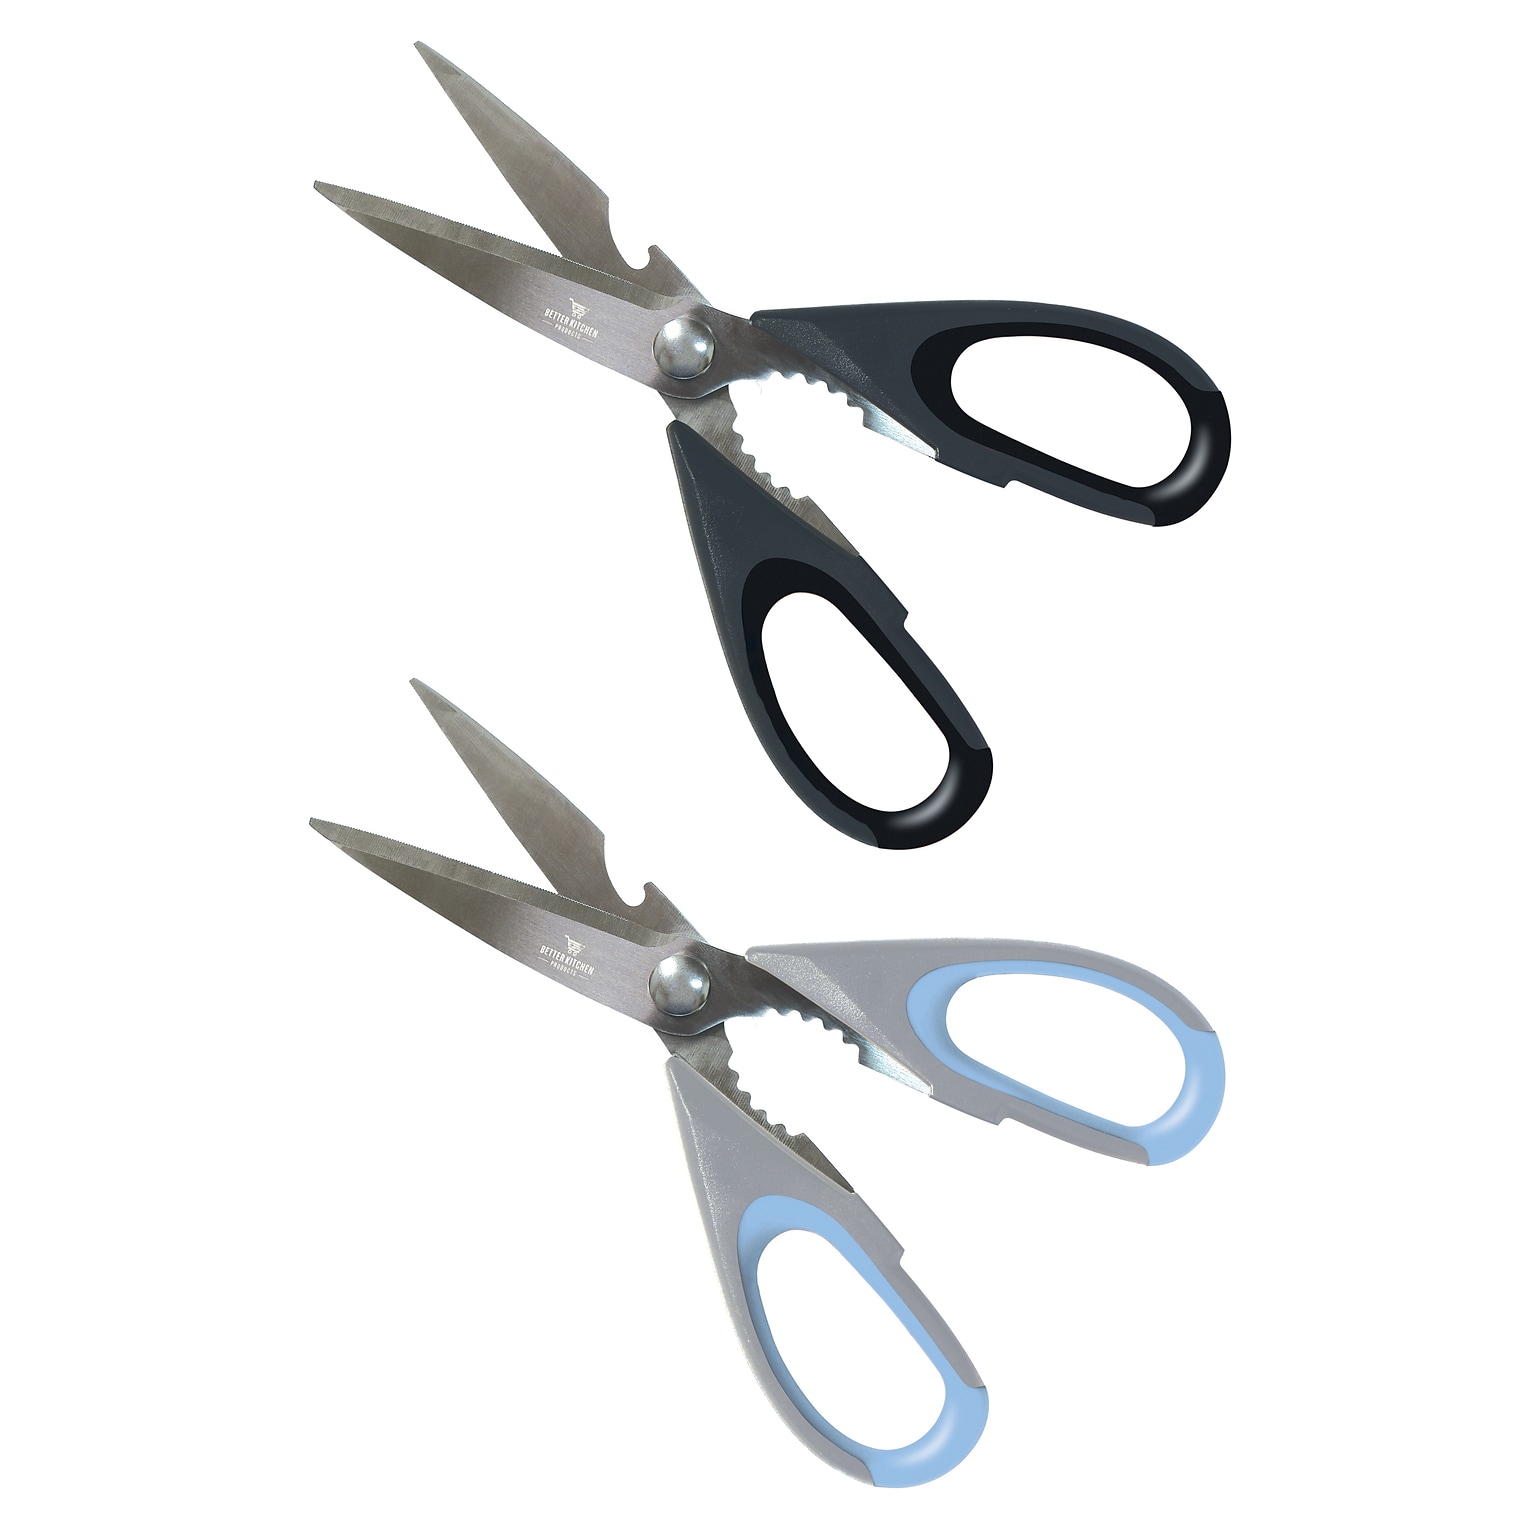 Better Kitchen Products Stainless Steel All Purpose Kitchen/Utility Scissors, 8.5, Black/Gray, Silver/Blue, 2/Pack (00601-2PK)